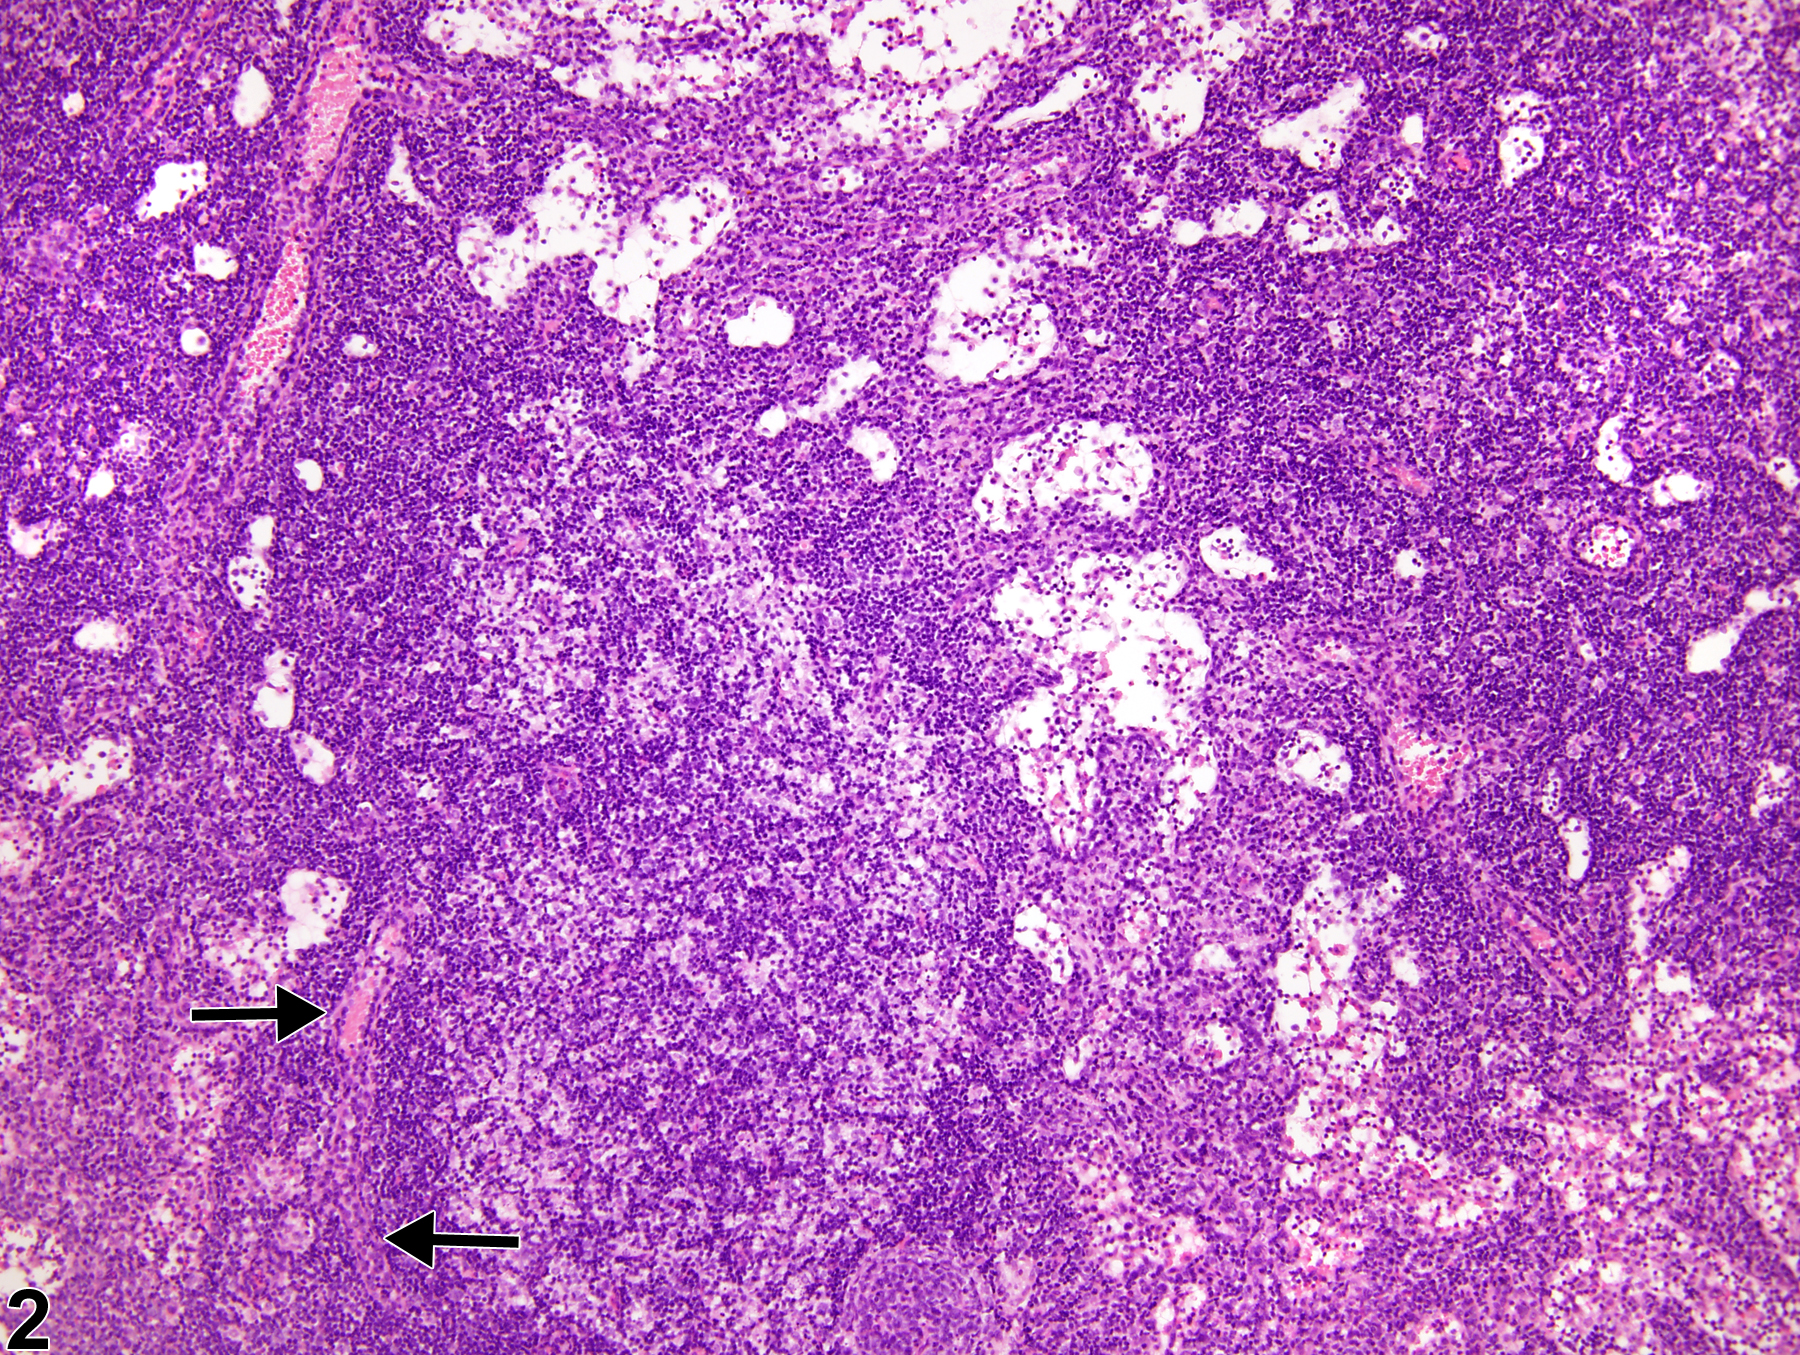 Image of atrophy in the lymph node from a female F344/N rat in a subchronic study